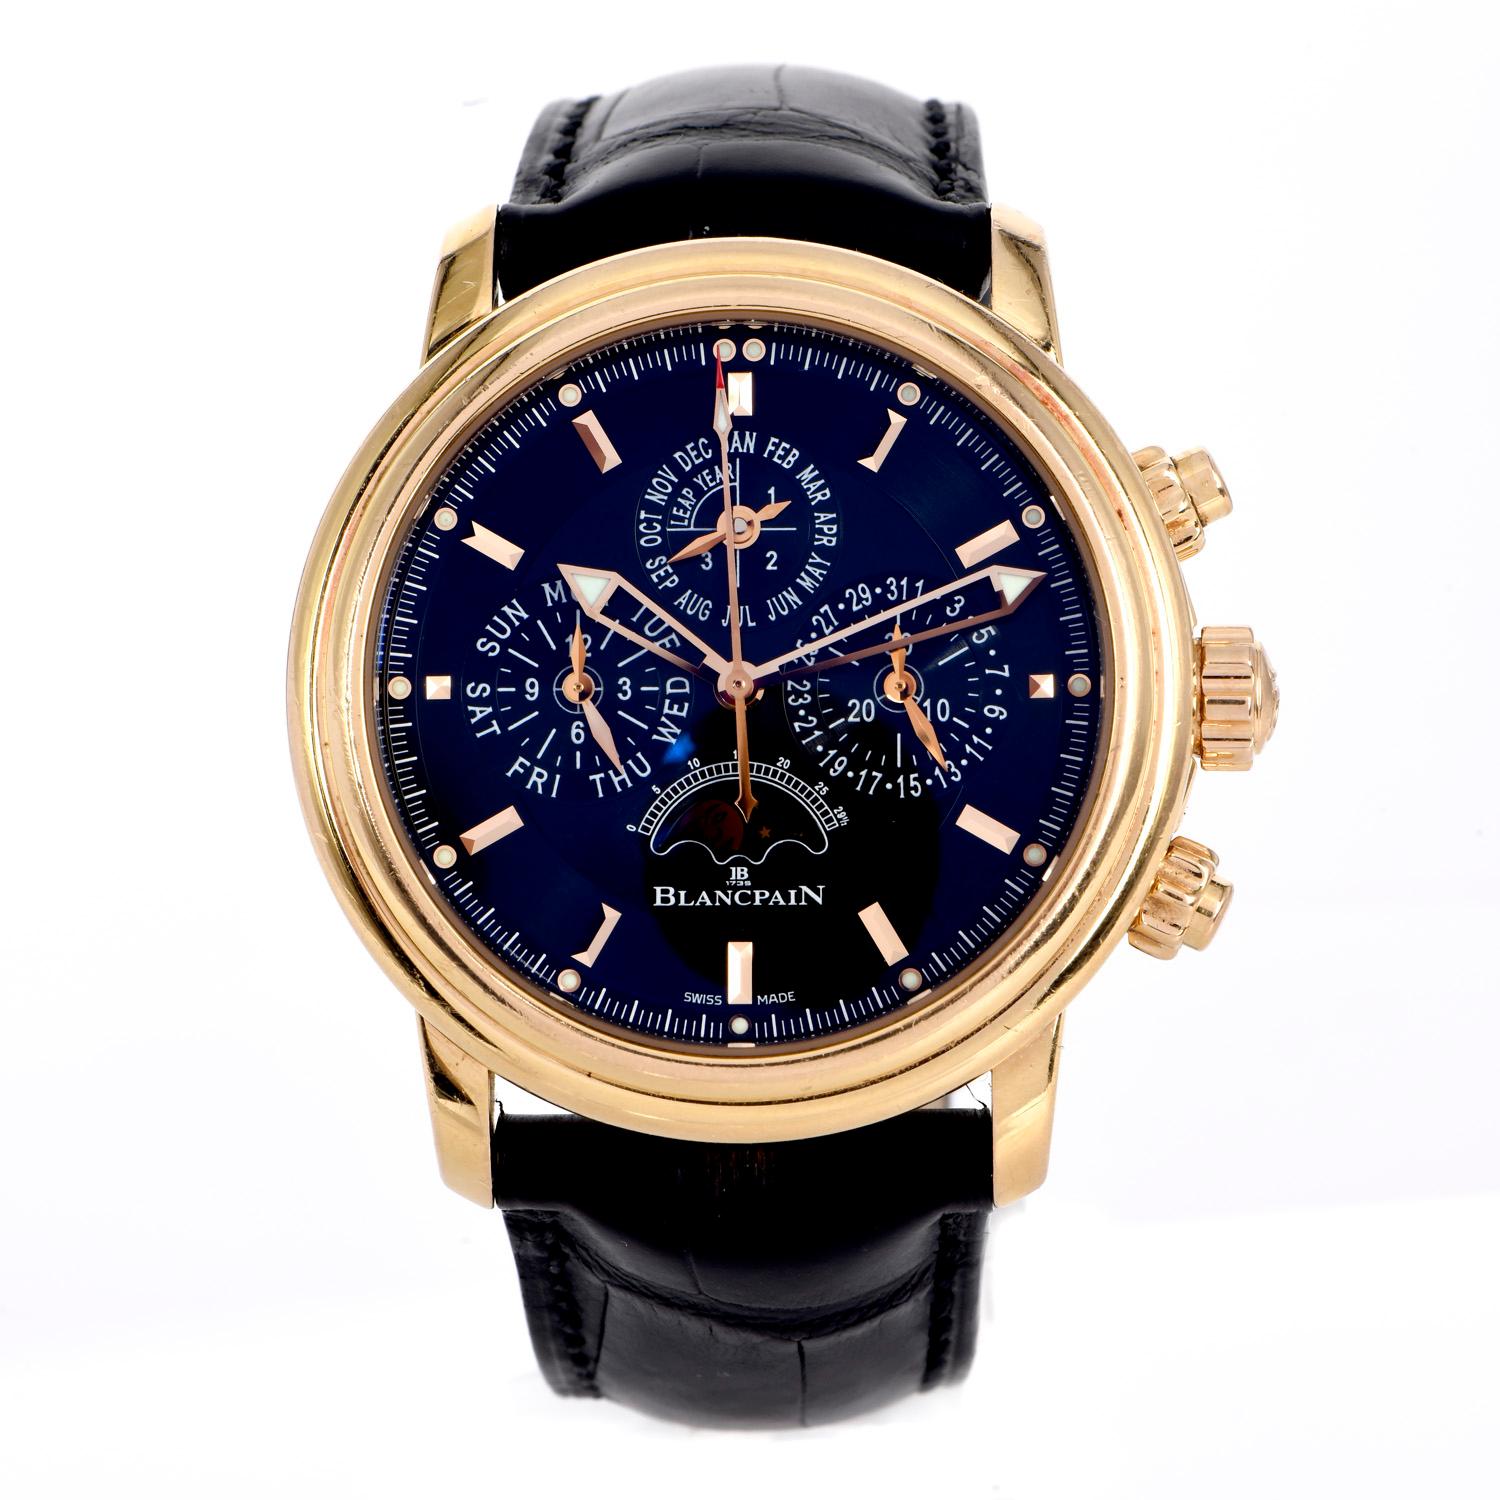 From the luxury prestige, Swiss watch brand Blancpain,

We present this Leman Flyback Chrono Perpetual Calendar in 18k rose gold men's watch.

 With date, month & moon phase functions, Automatic Chronograph movement, 40mm case size. Ref 2685F. Circa